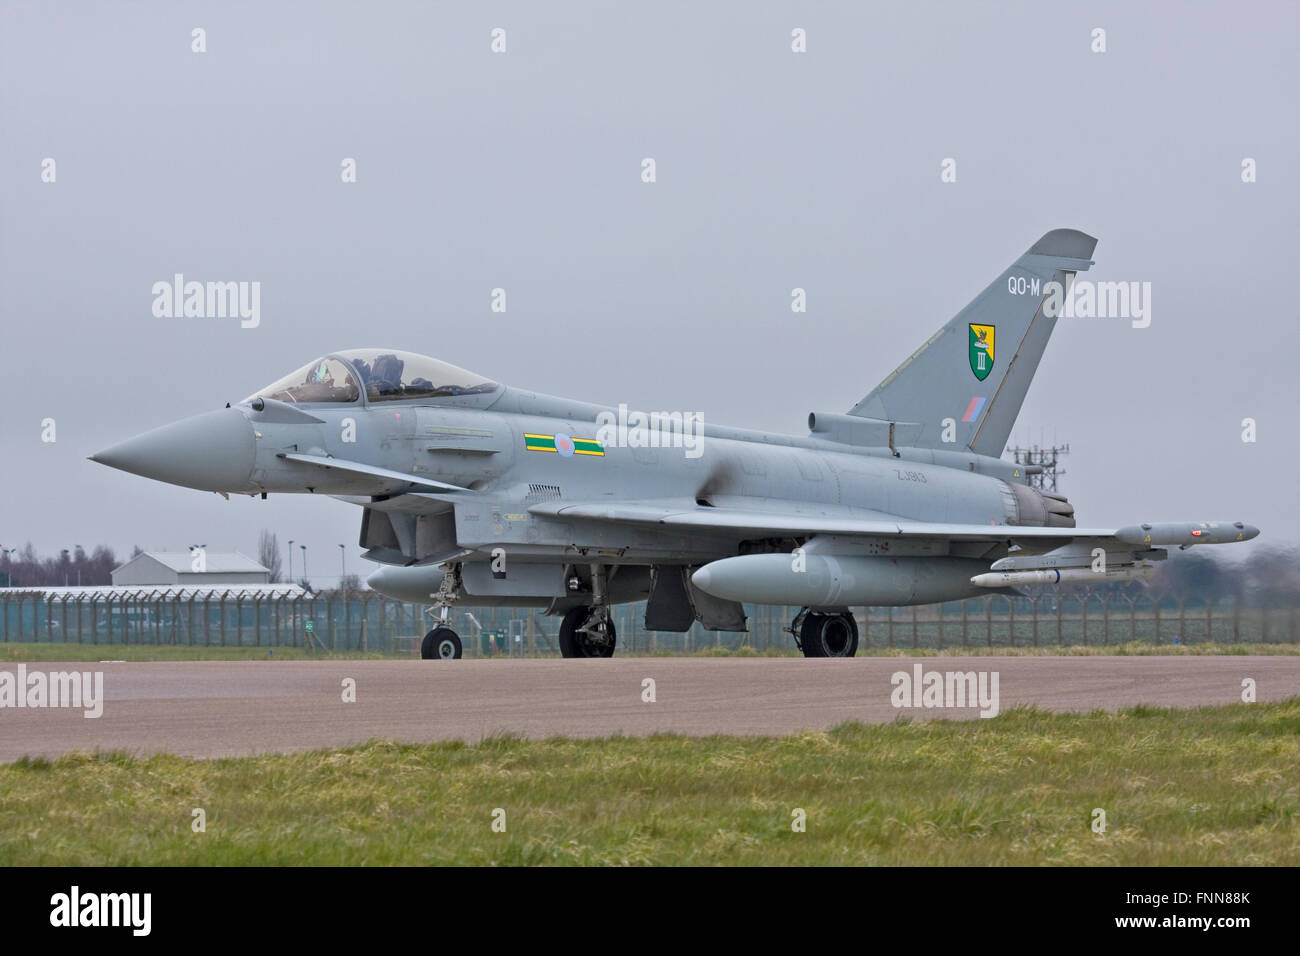 Typhoon ZJ913/QO-M of No.3(F) Squadron at RAF Coningsby Stock Photo